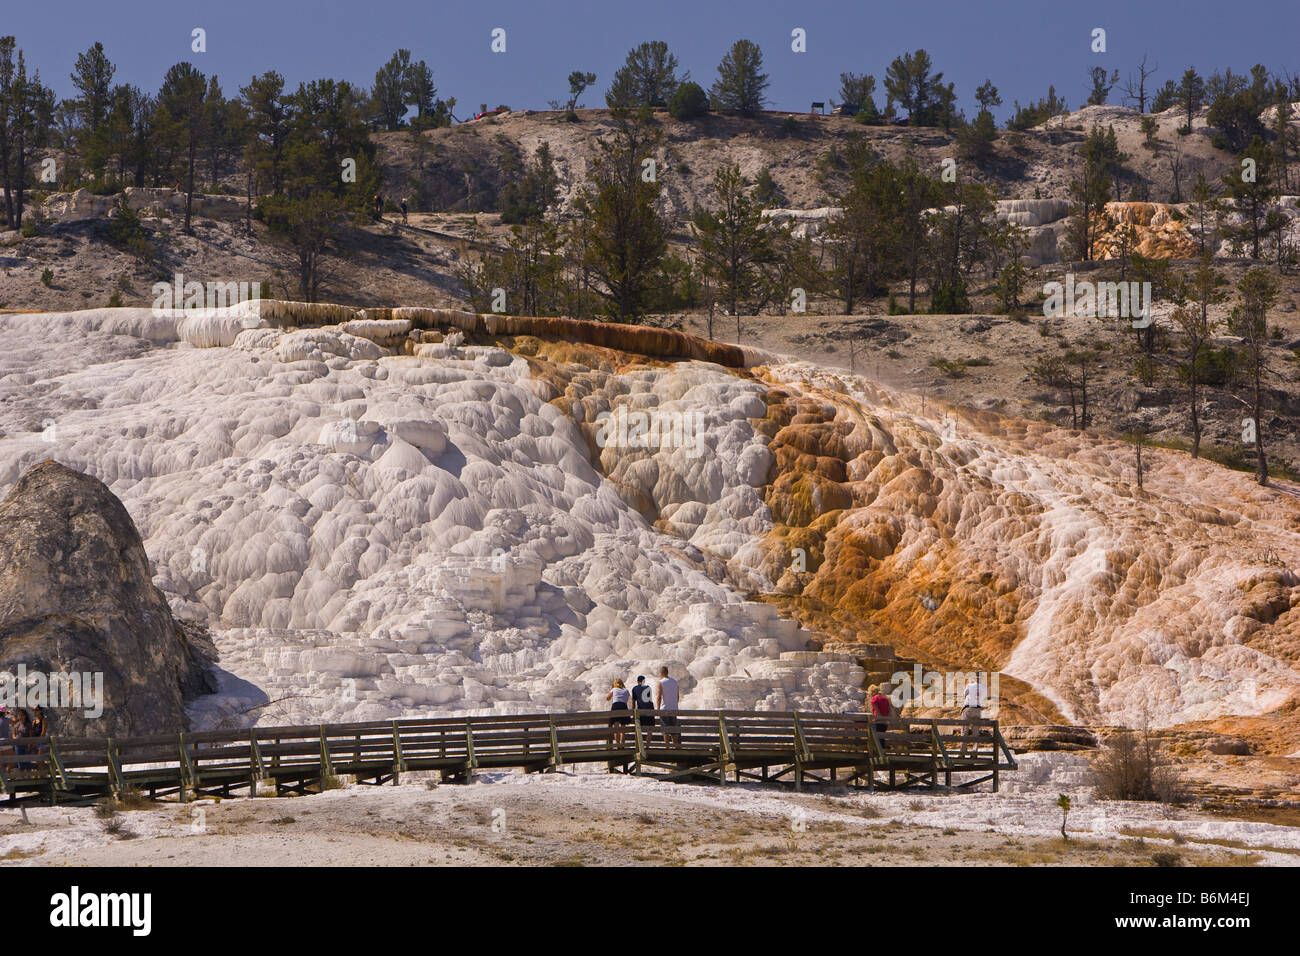 YELLOWSTONE NATIONAL PARK, WYOMING, USA - Tourists on boardwalk at Palette Spring area, Mammoth Hot Springs Terraces Stock Photo